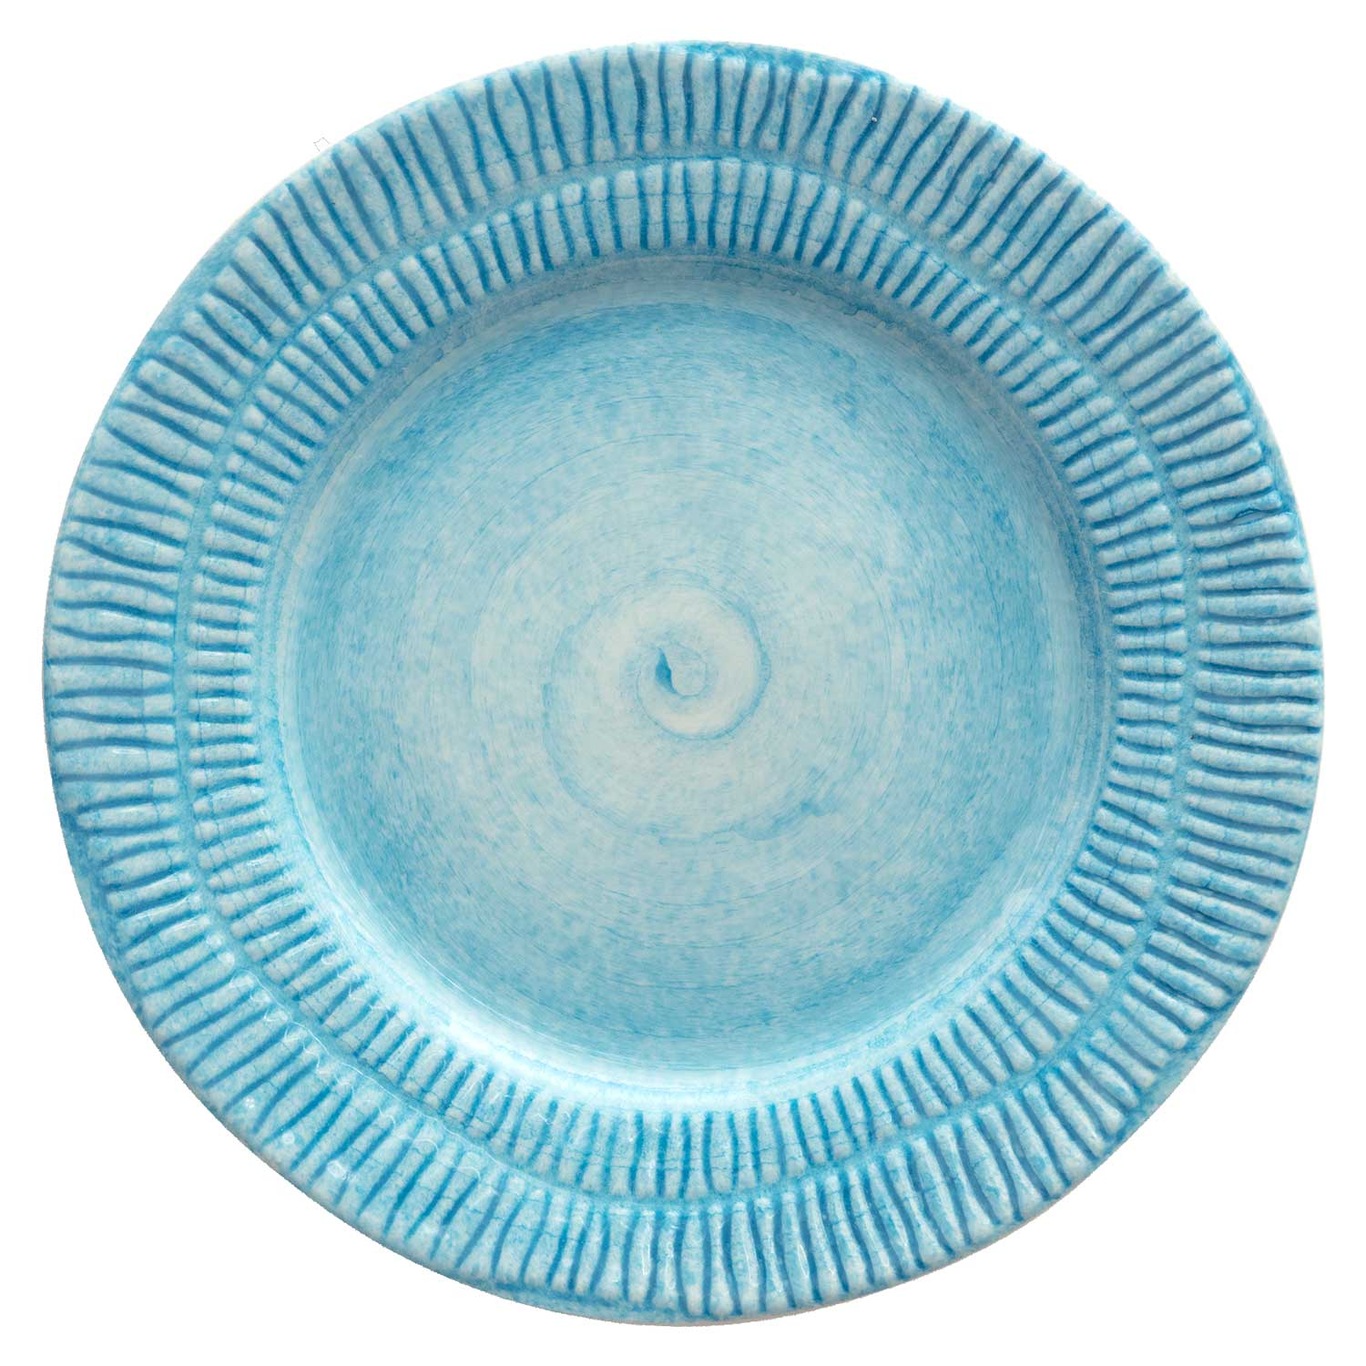 Stripes Plate 21 cm, Turquoise